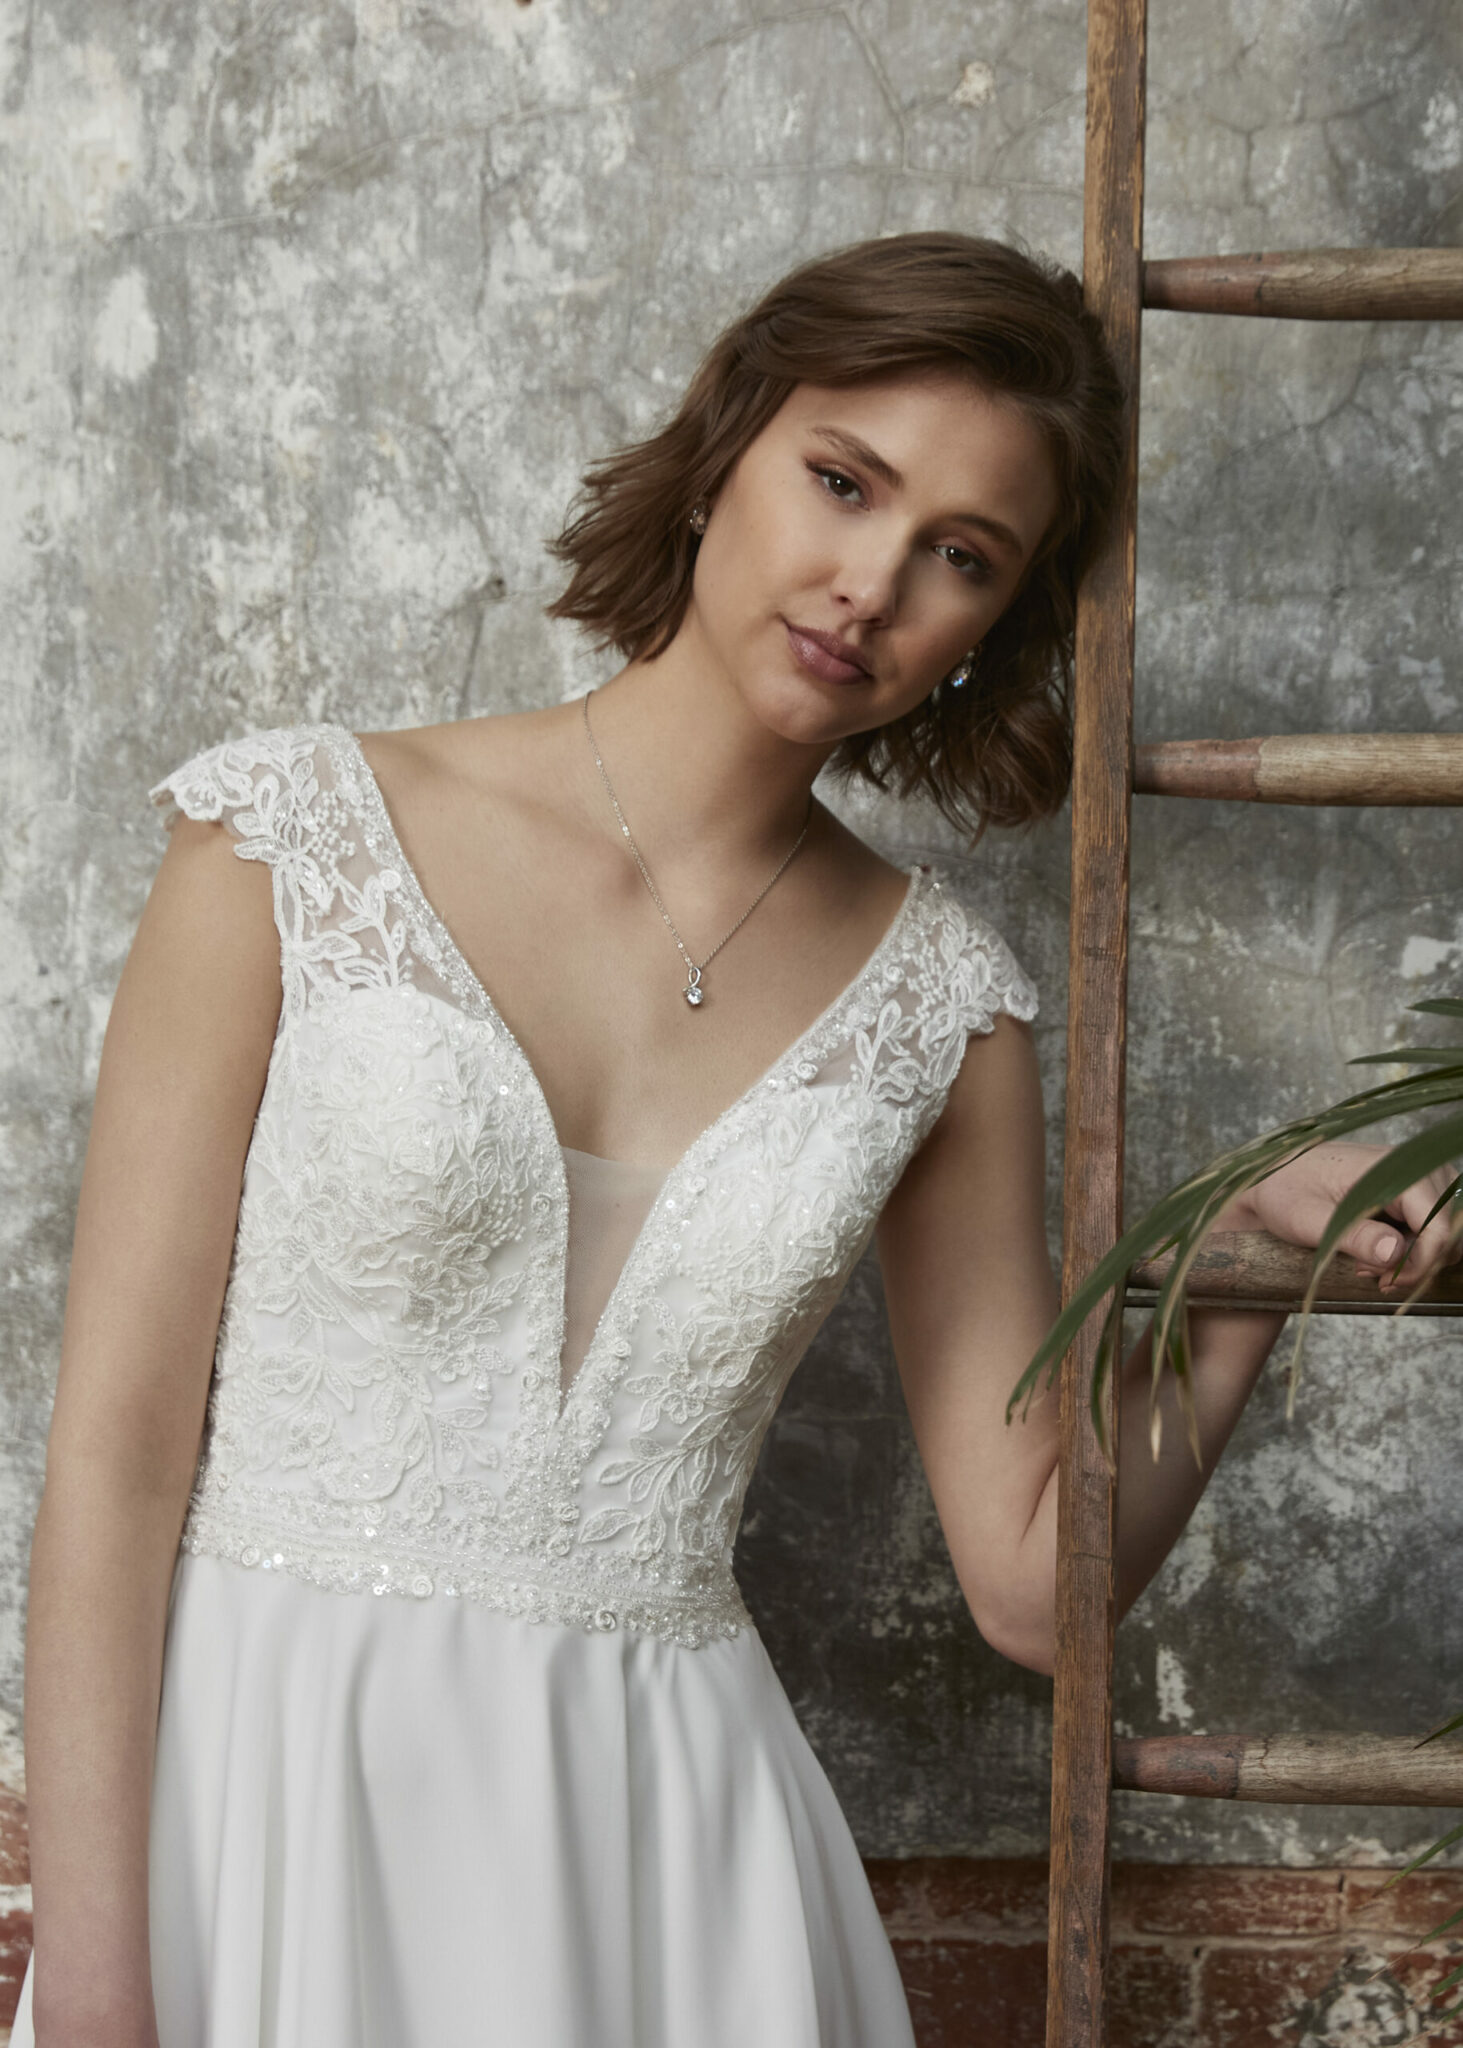 Skye - Skye Fantastic lace cap sleeves lead down into a plunging neckline and Chiffon A-line skirt. Shown in ivory.